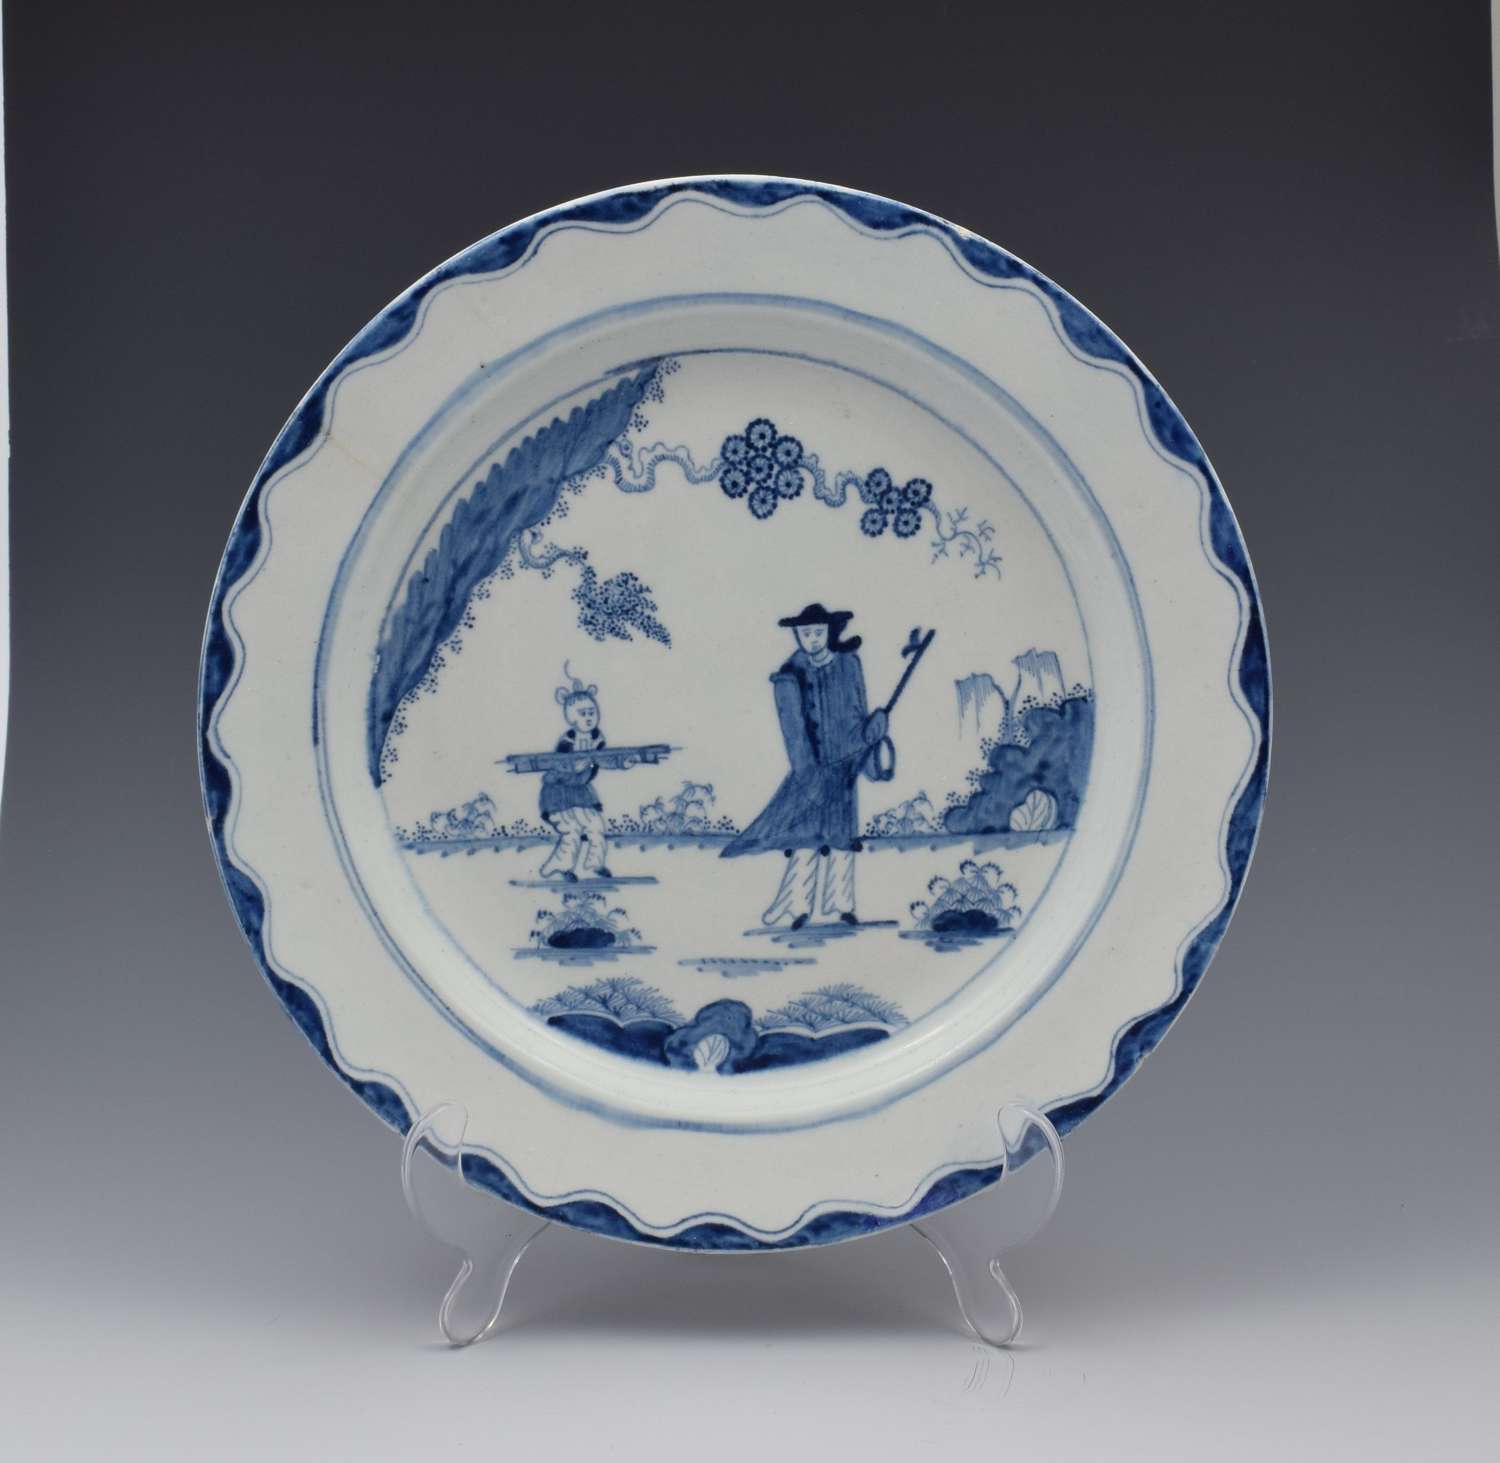 Large 18th Century Bow Porcelain Plate The Golfer & Caddy Pattern